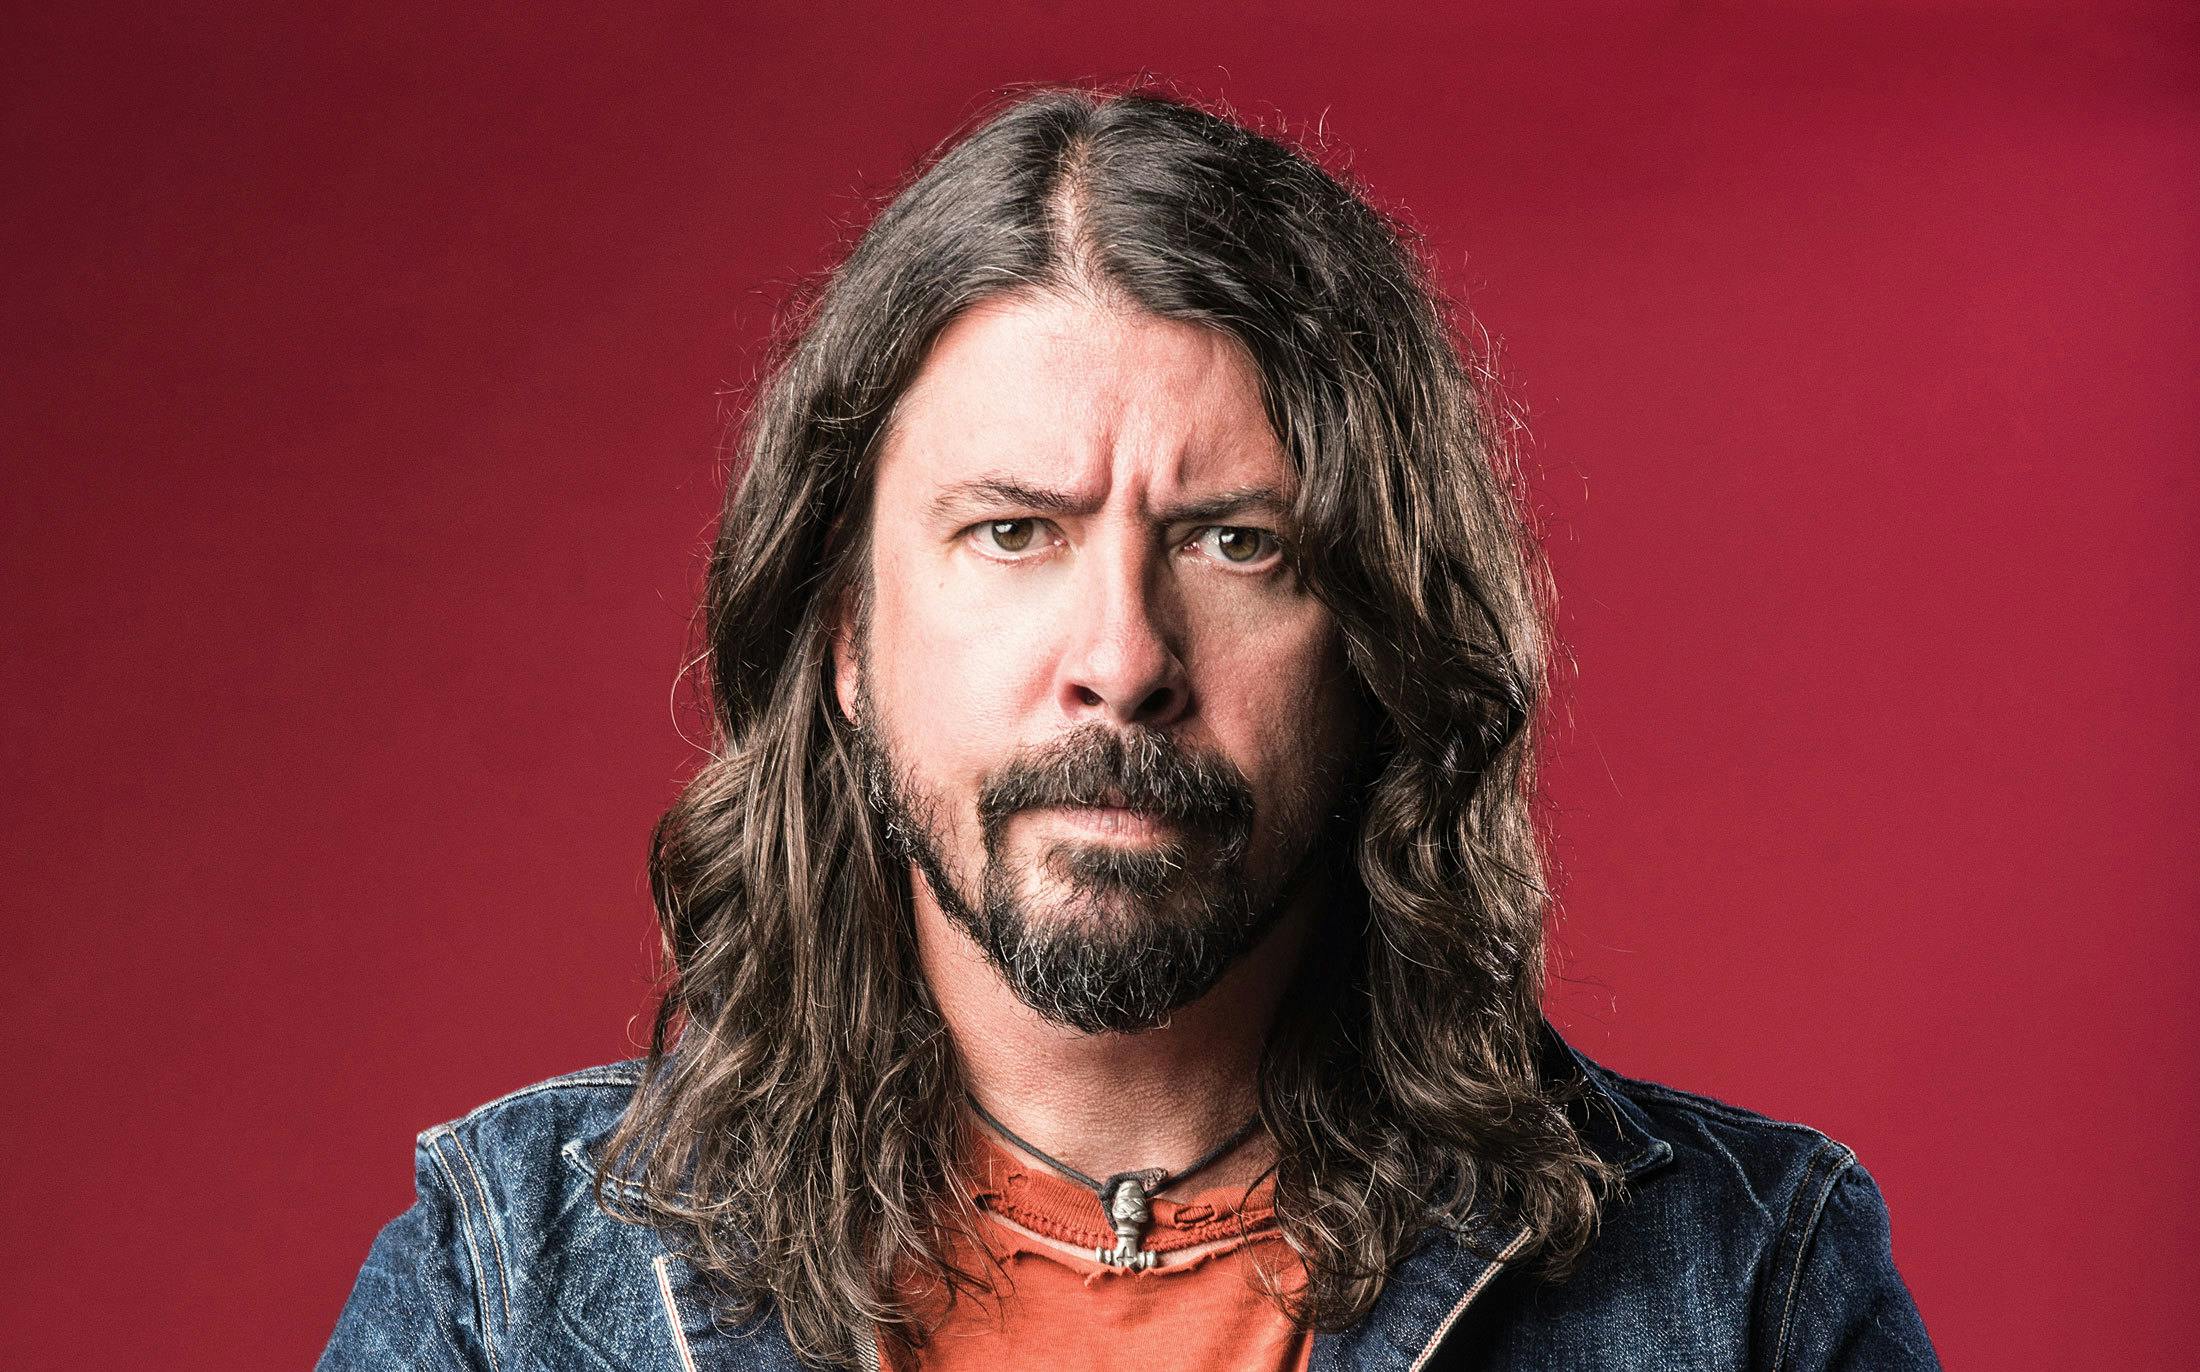 20 things you probably didn’t know about Dave Grohl